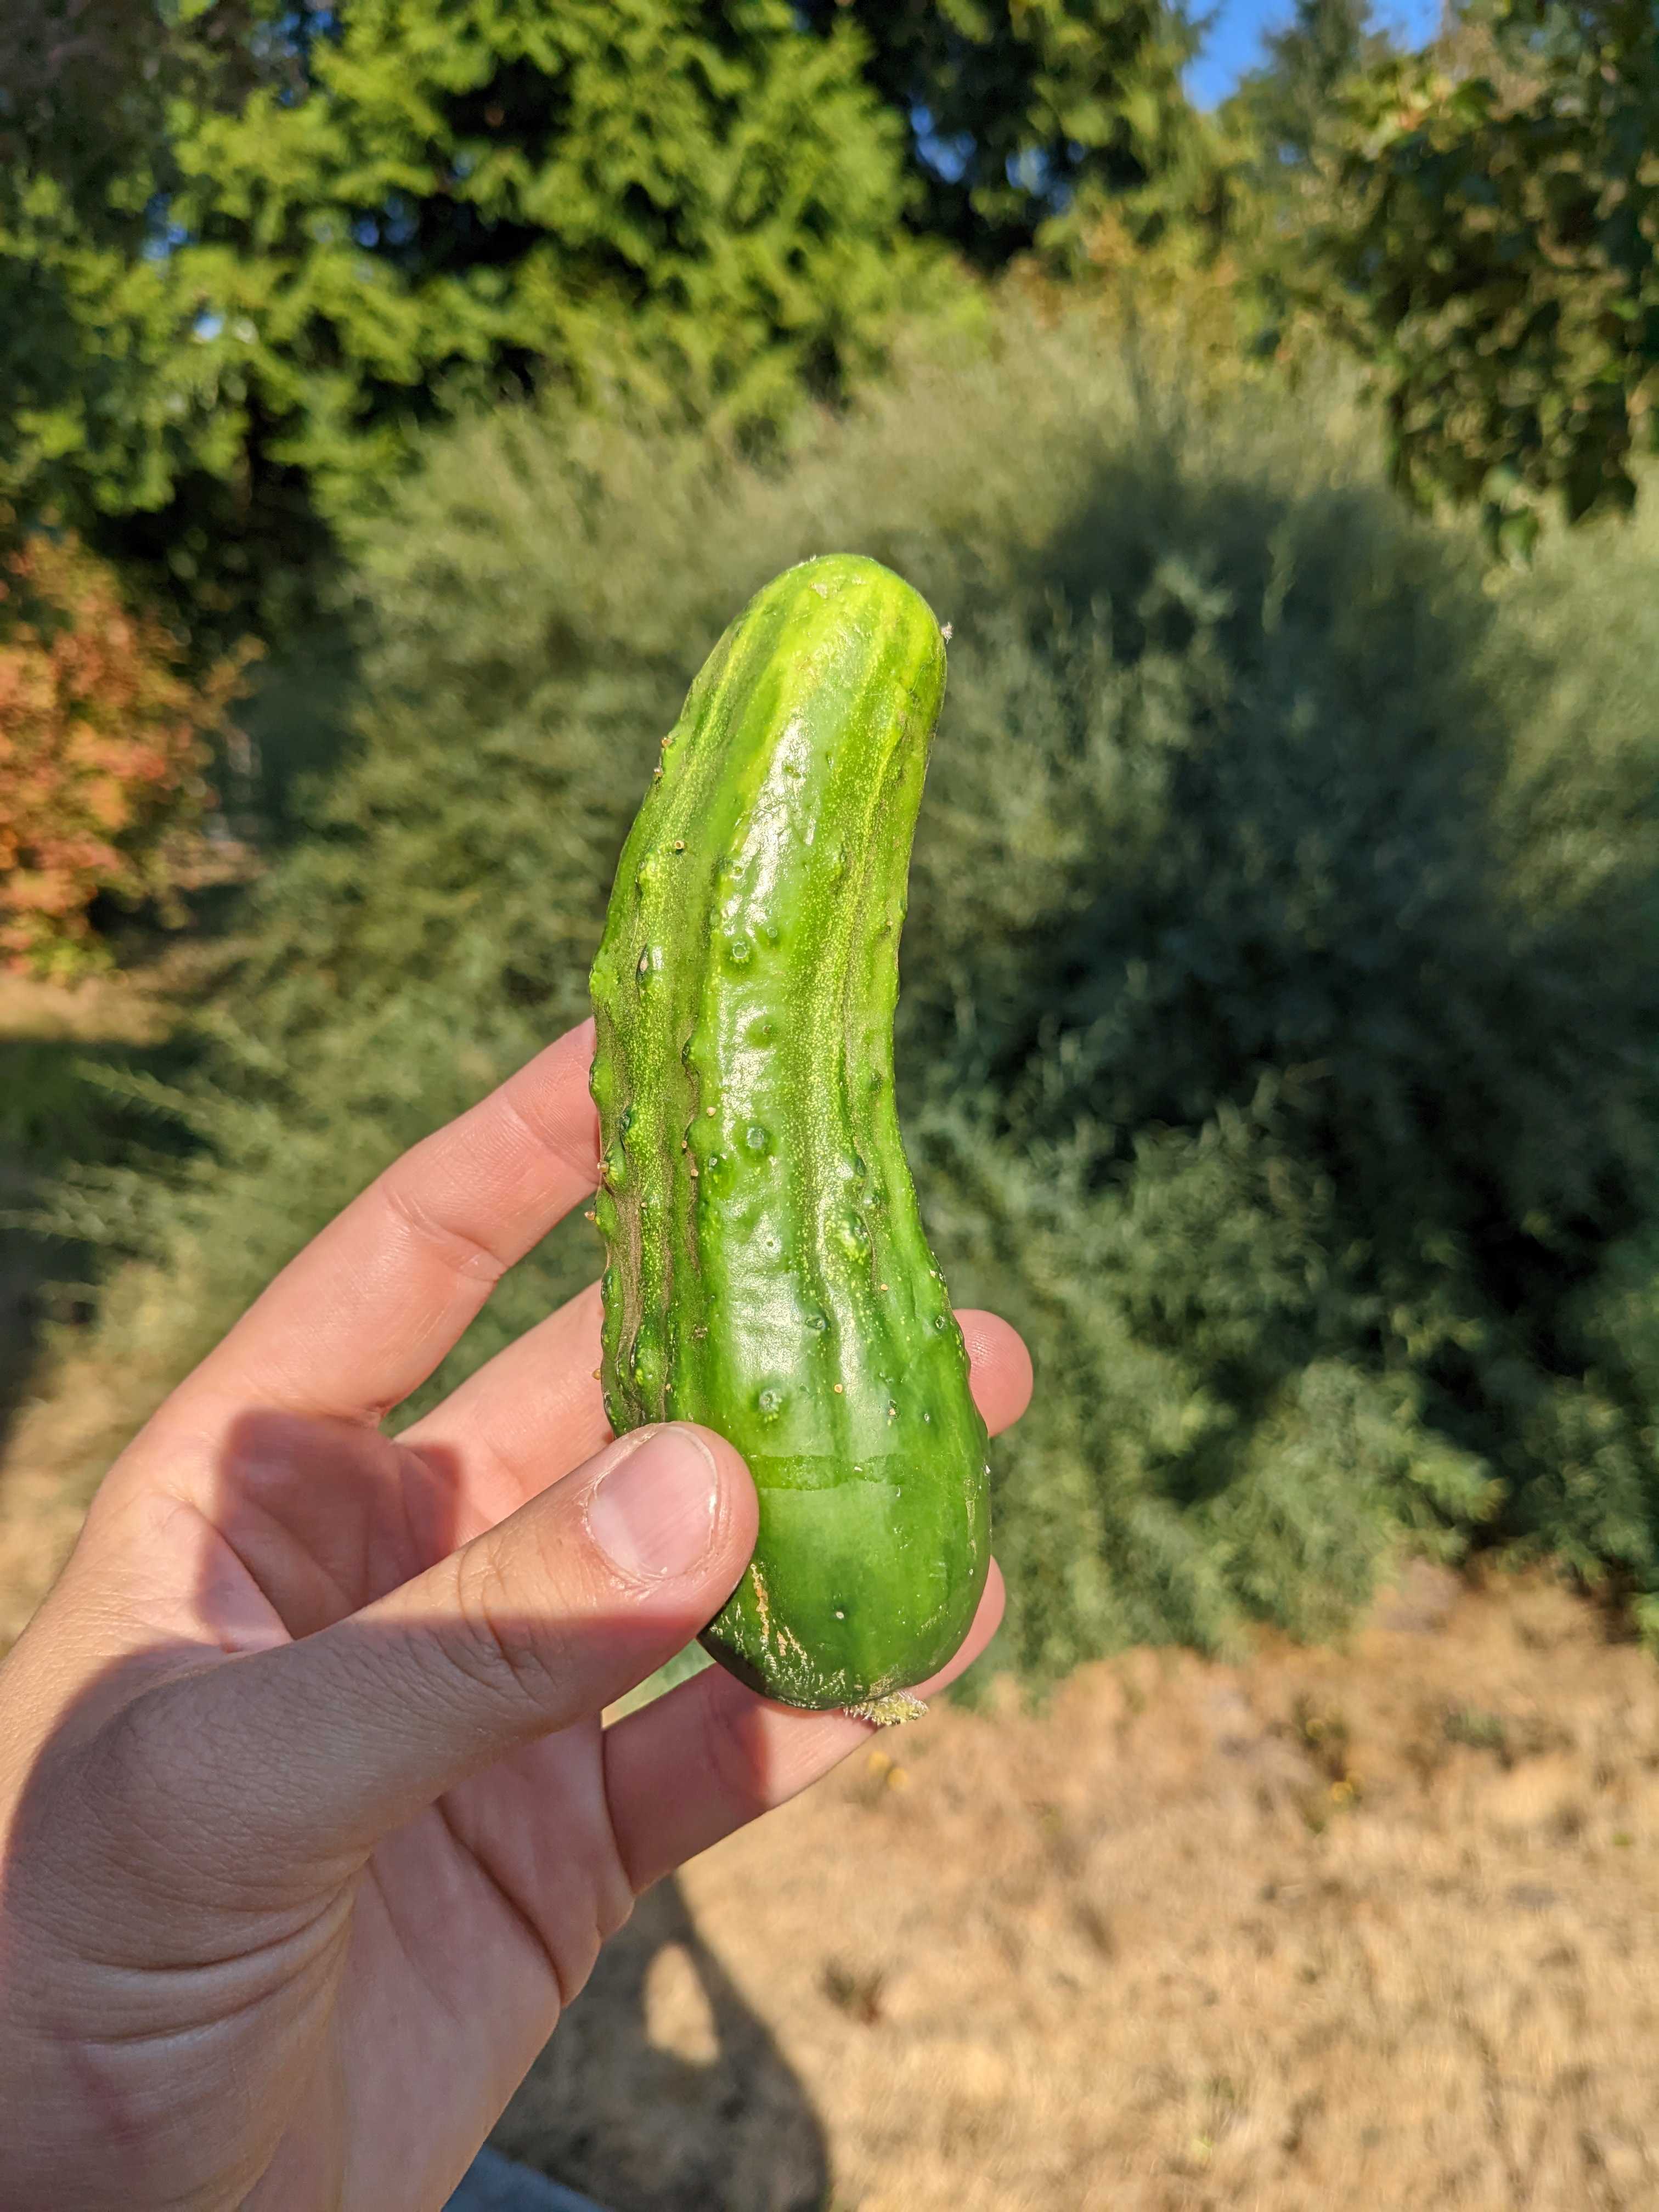 A picture of Cucumber - Pickling